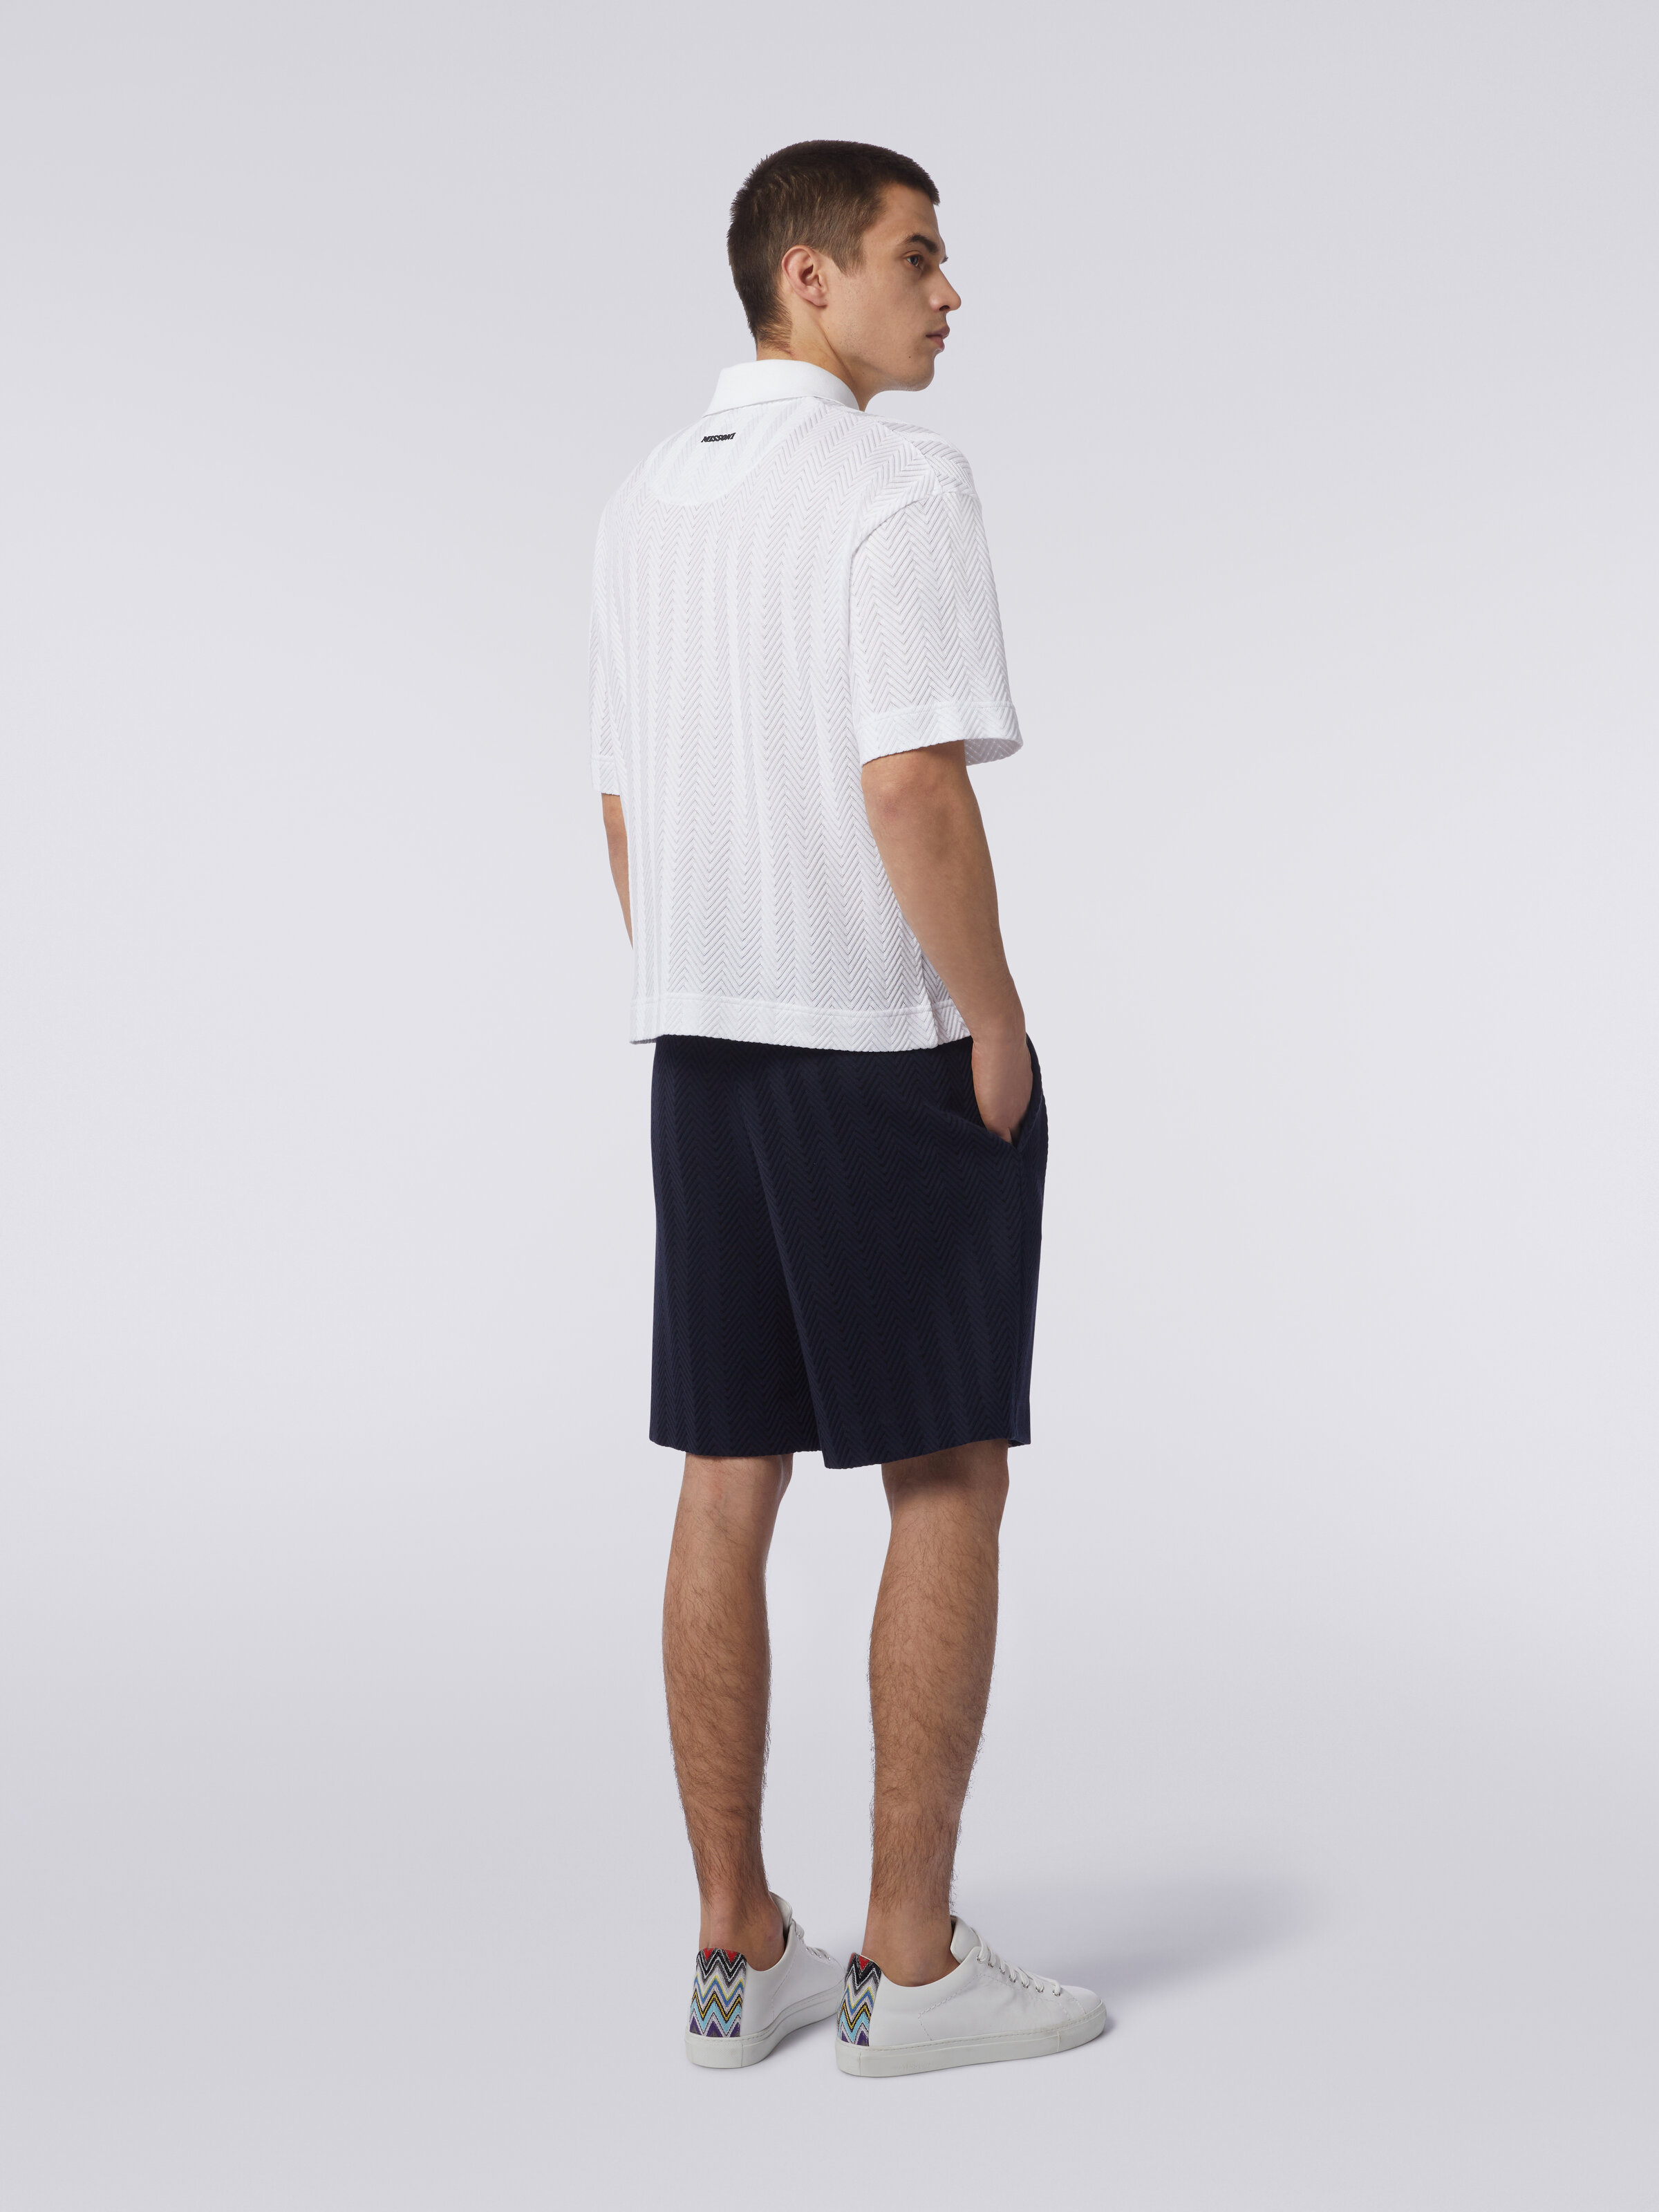 Short-sleeved polo shirt in chevron viscose and cotton, White  - 3